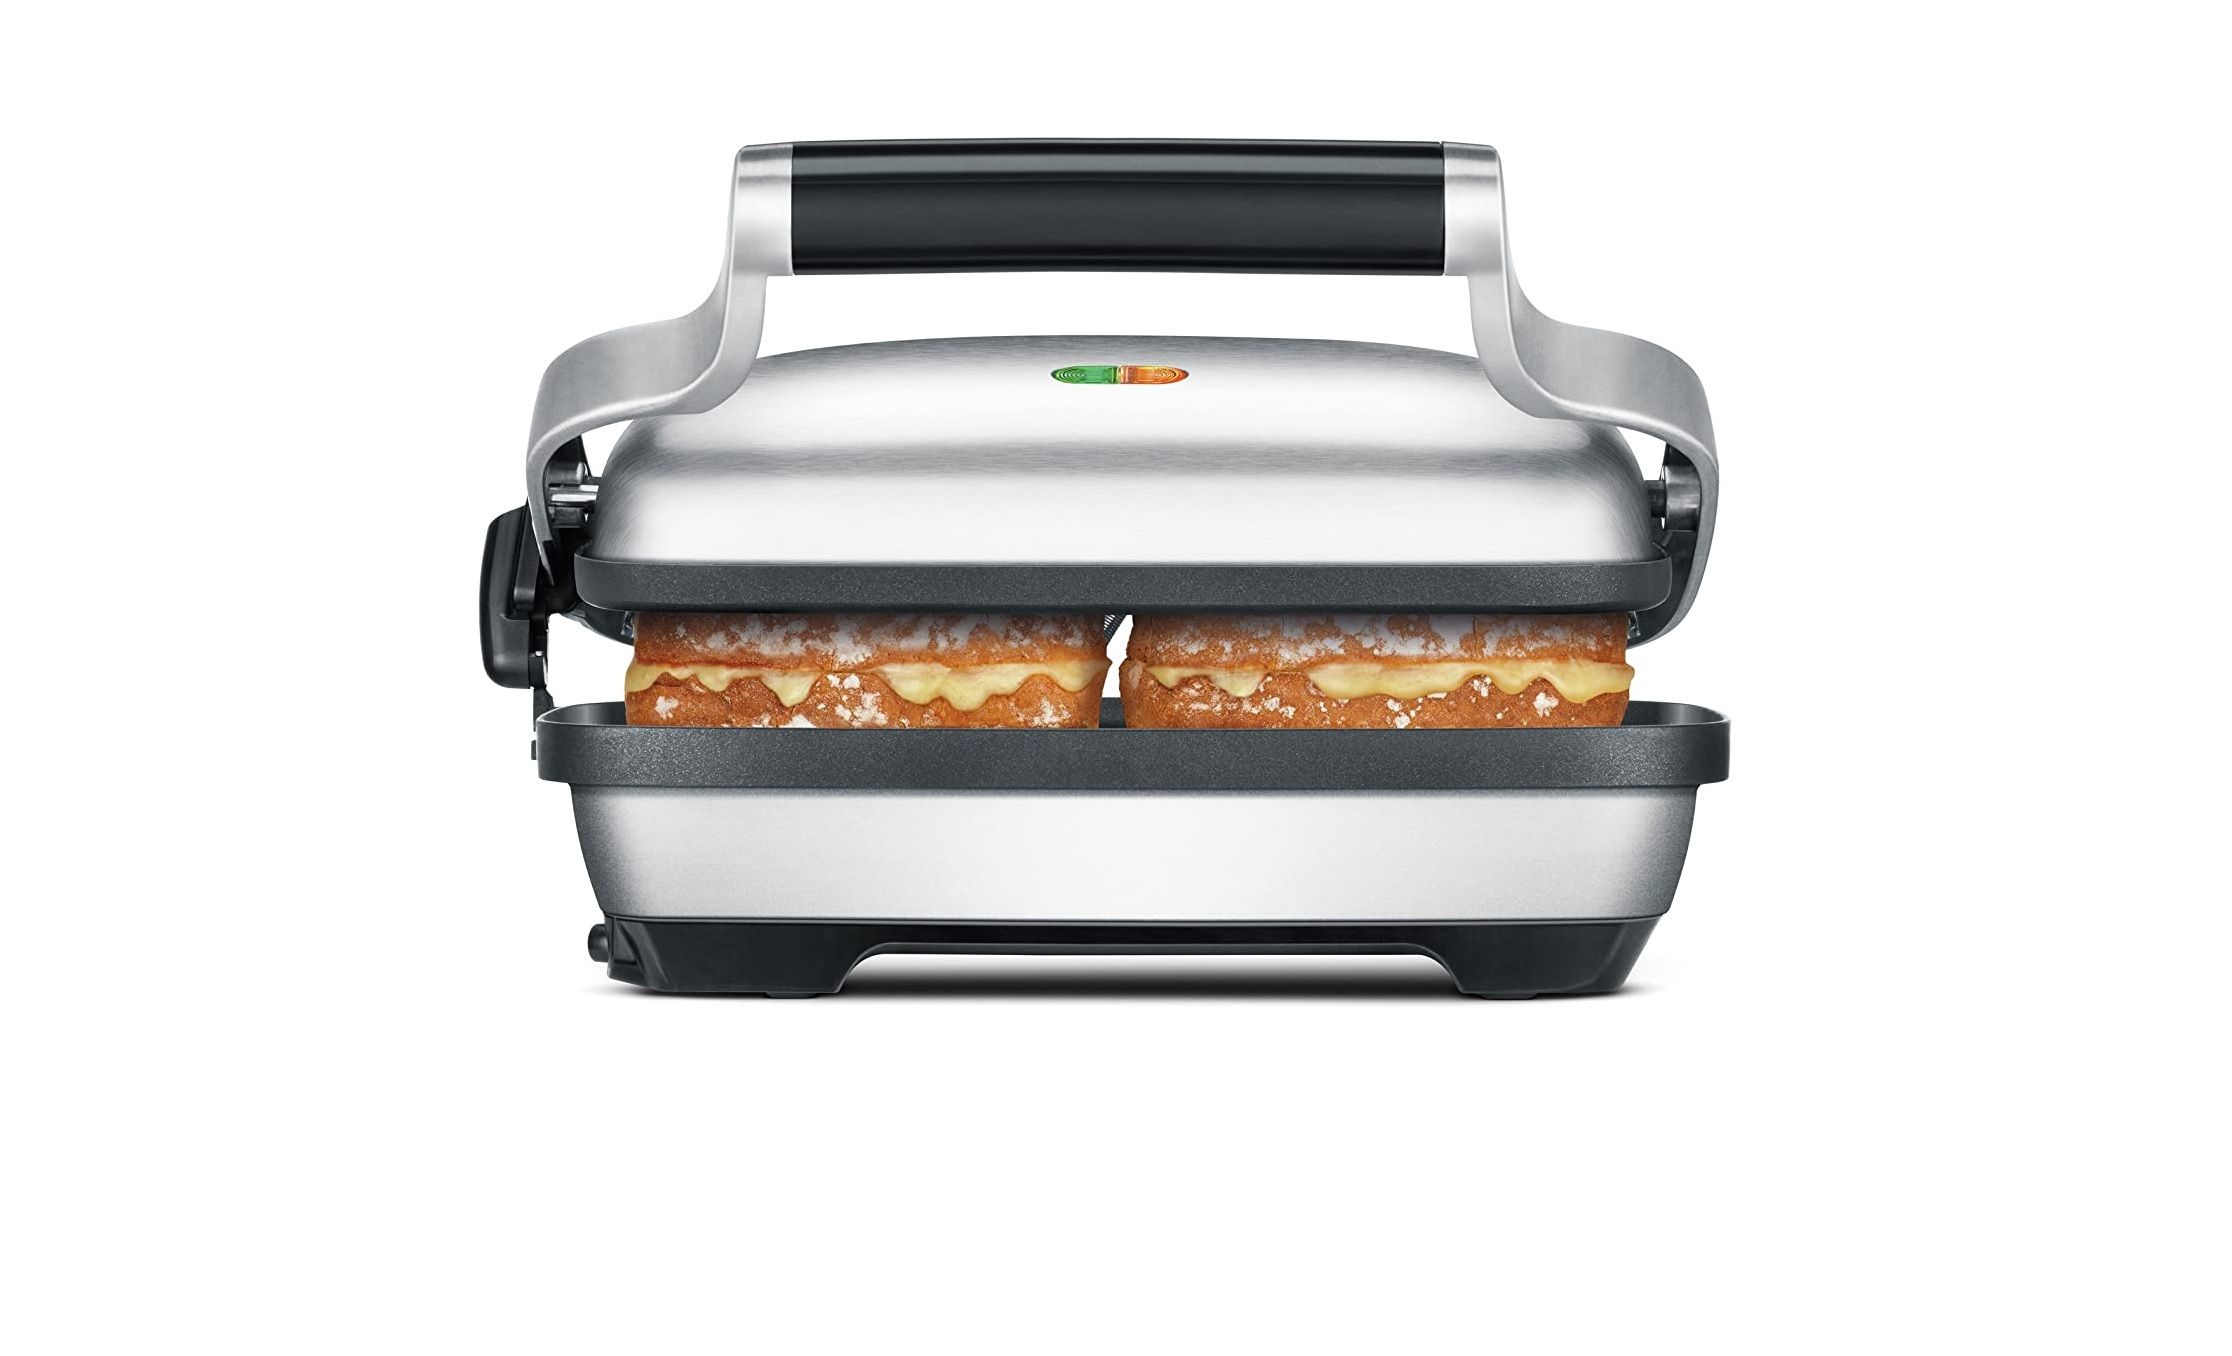 grilled cheese being cooked in the breville bsg600bss panini press